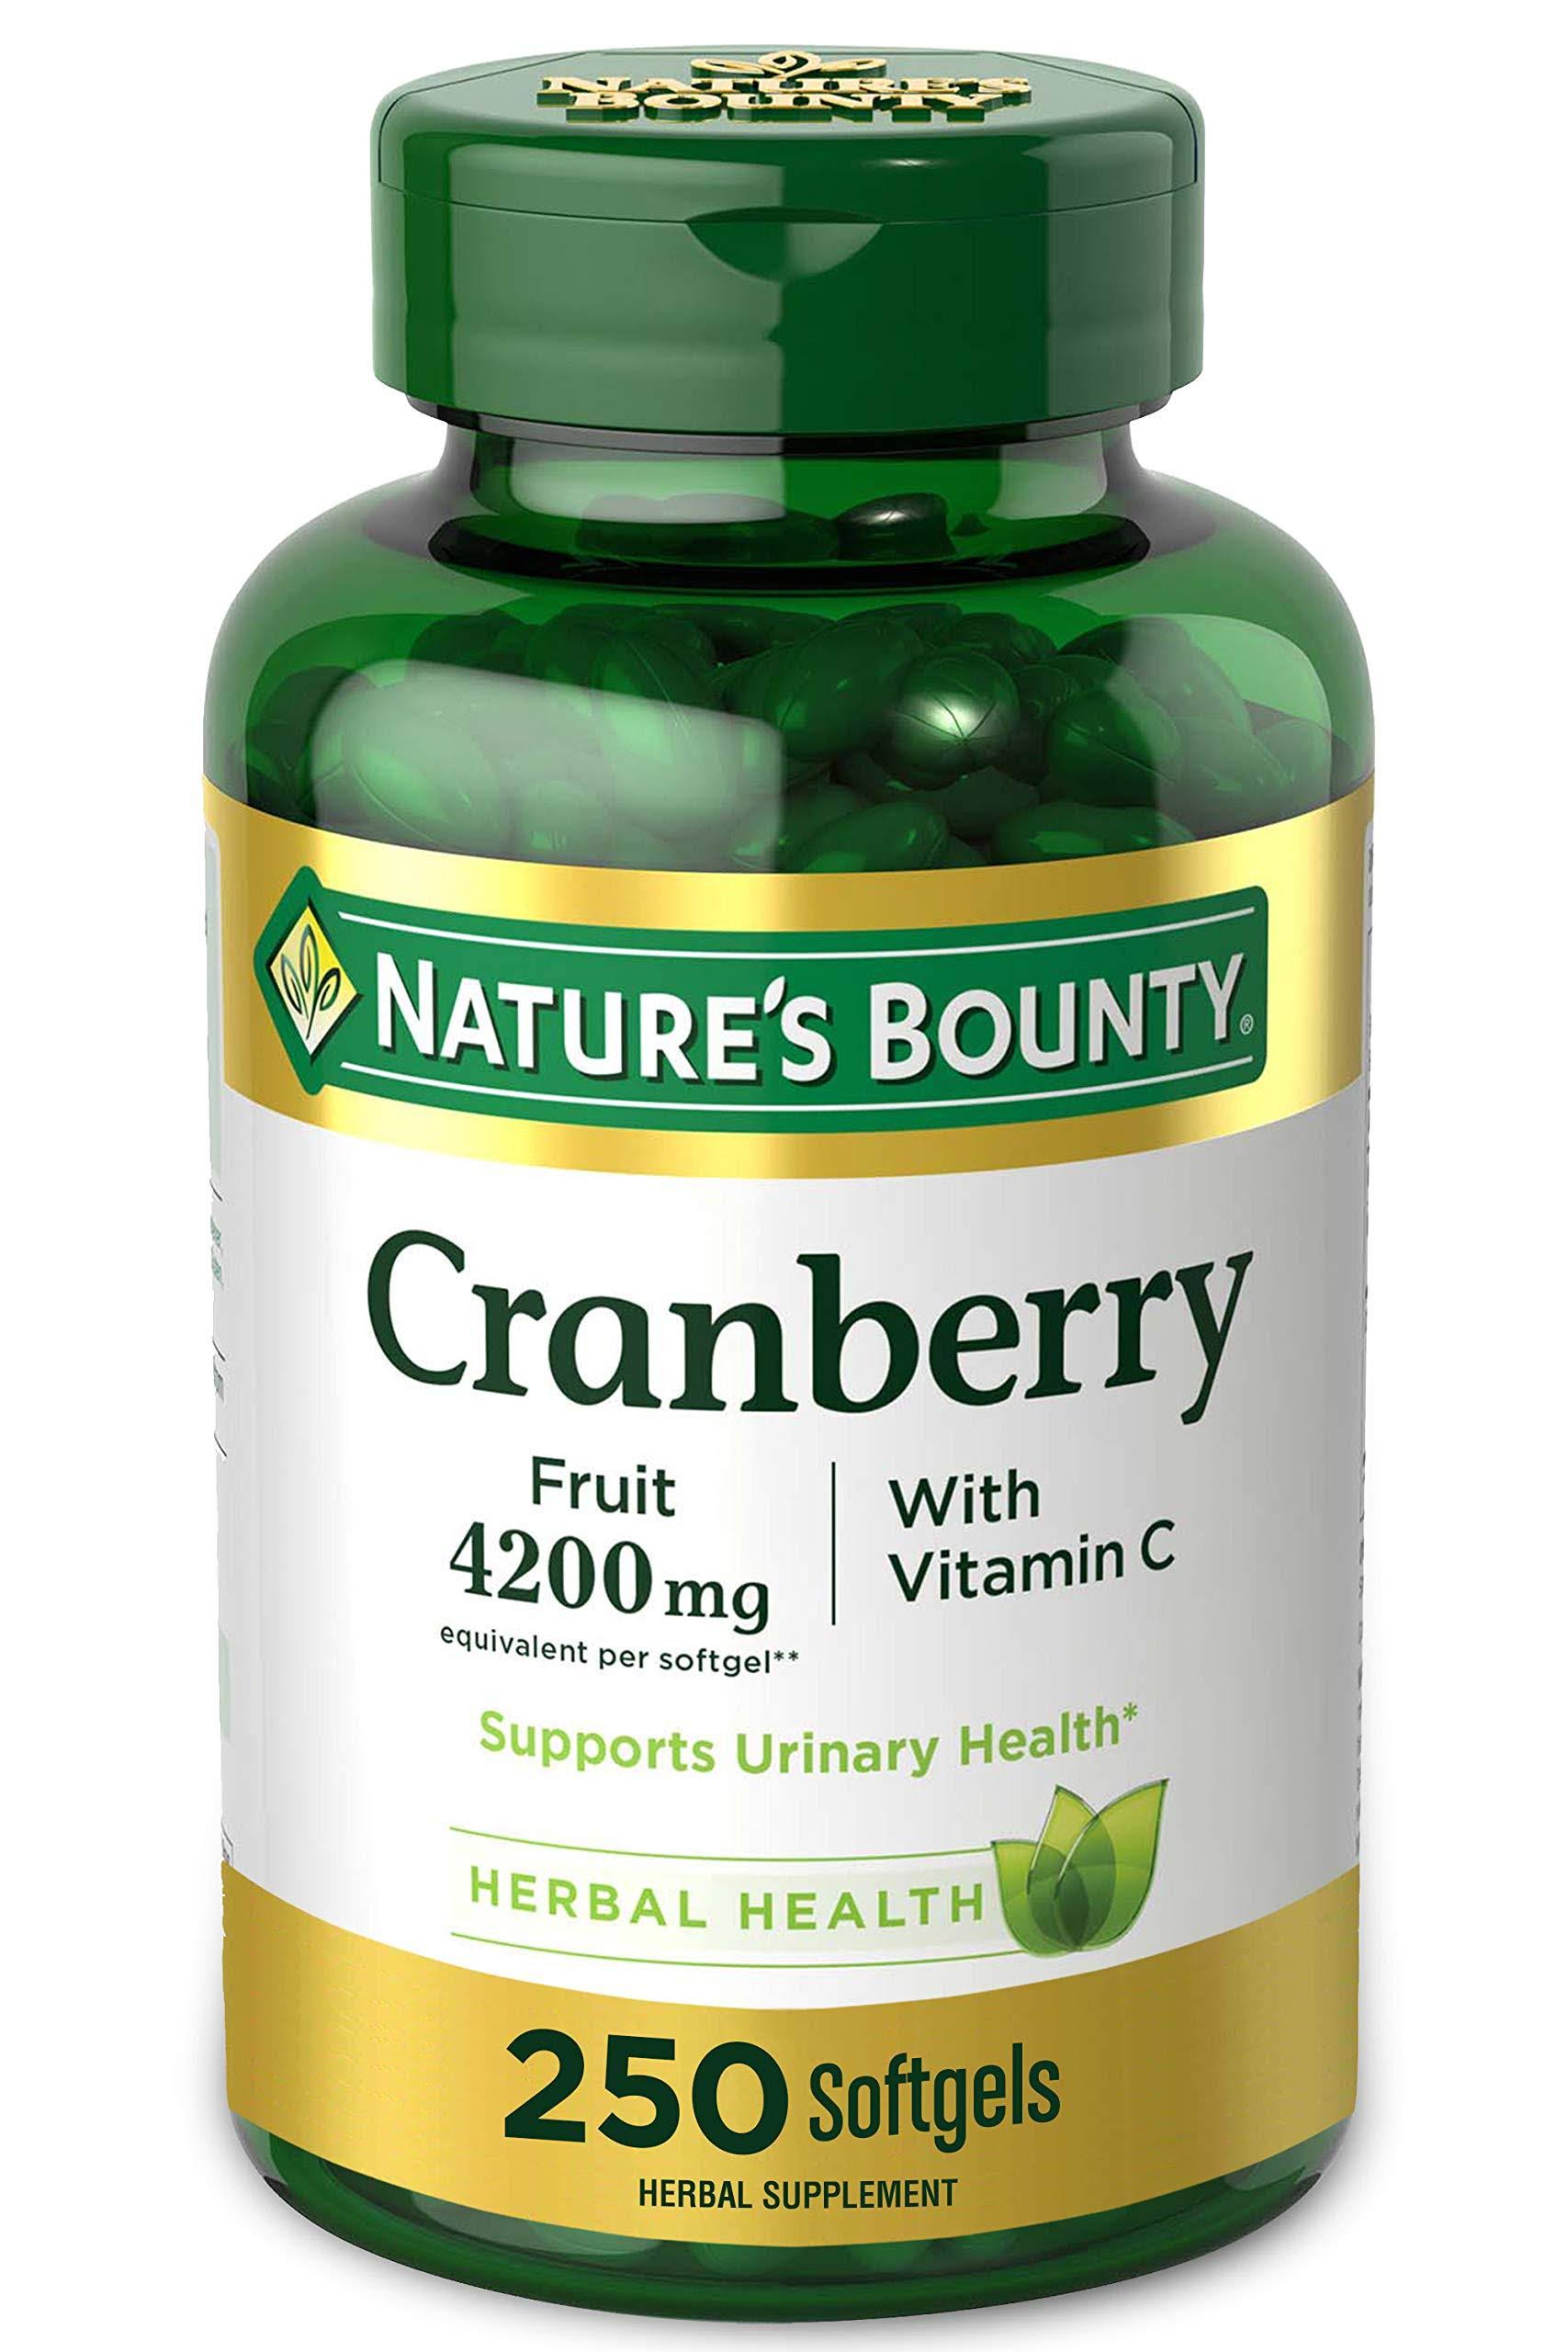 Nature's Bounty Cranberry with Vitamin C Supplement - 250 Softgels